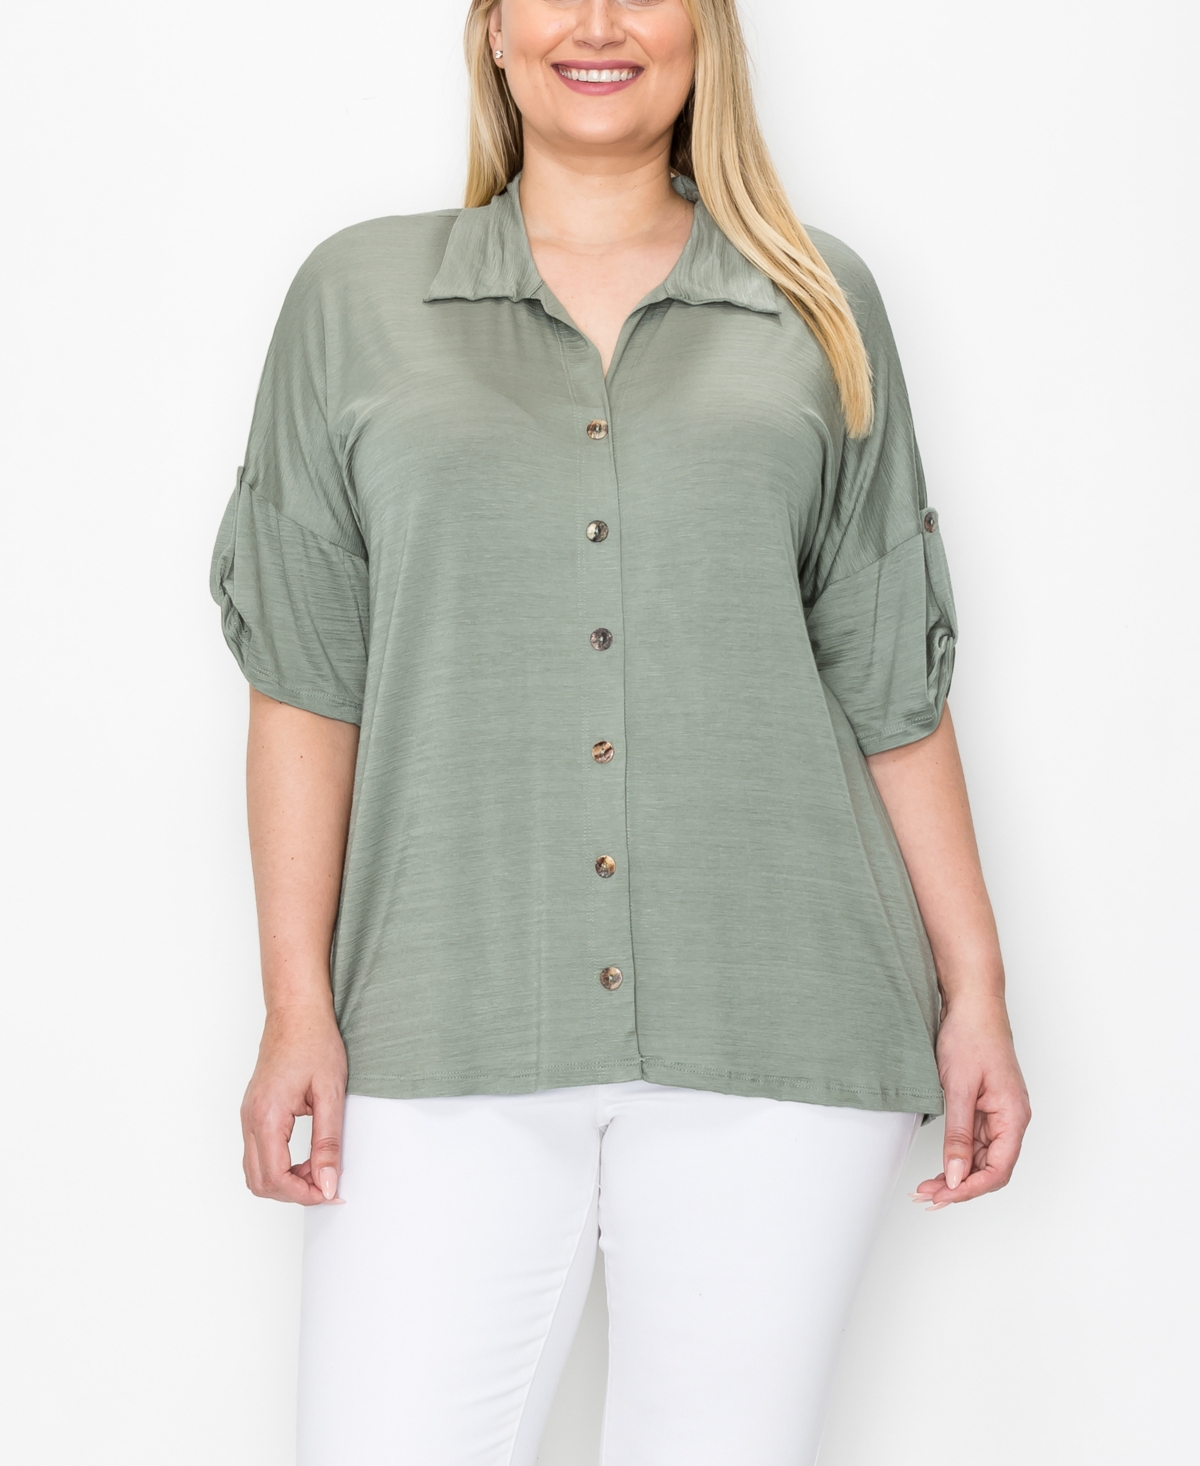 Coin 1804 Plus Size Campshirt Rolled Tab Short Sleeve Top In Dusty Green